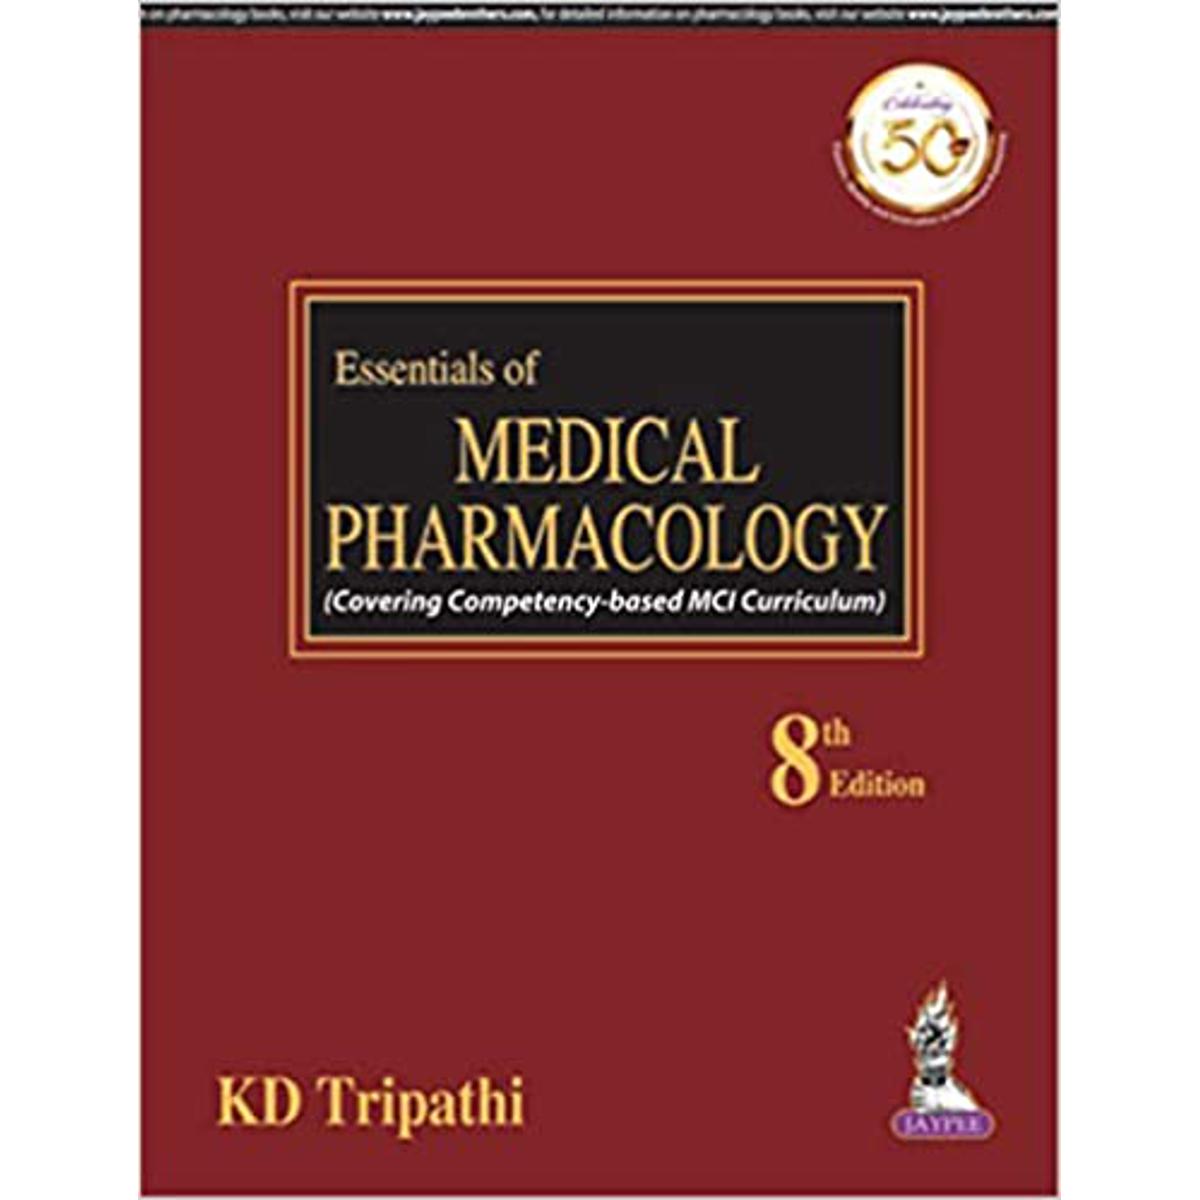 Medical Pharmacology 8th Edition by Tripathi